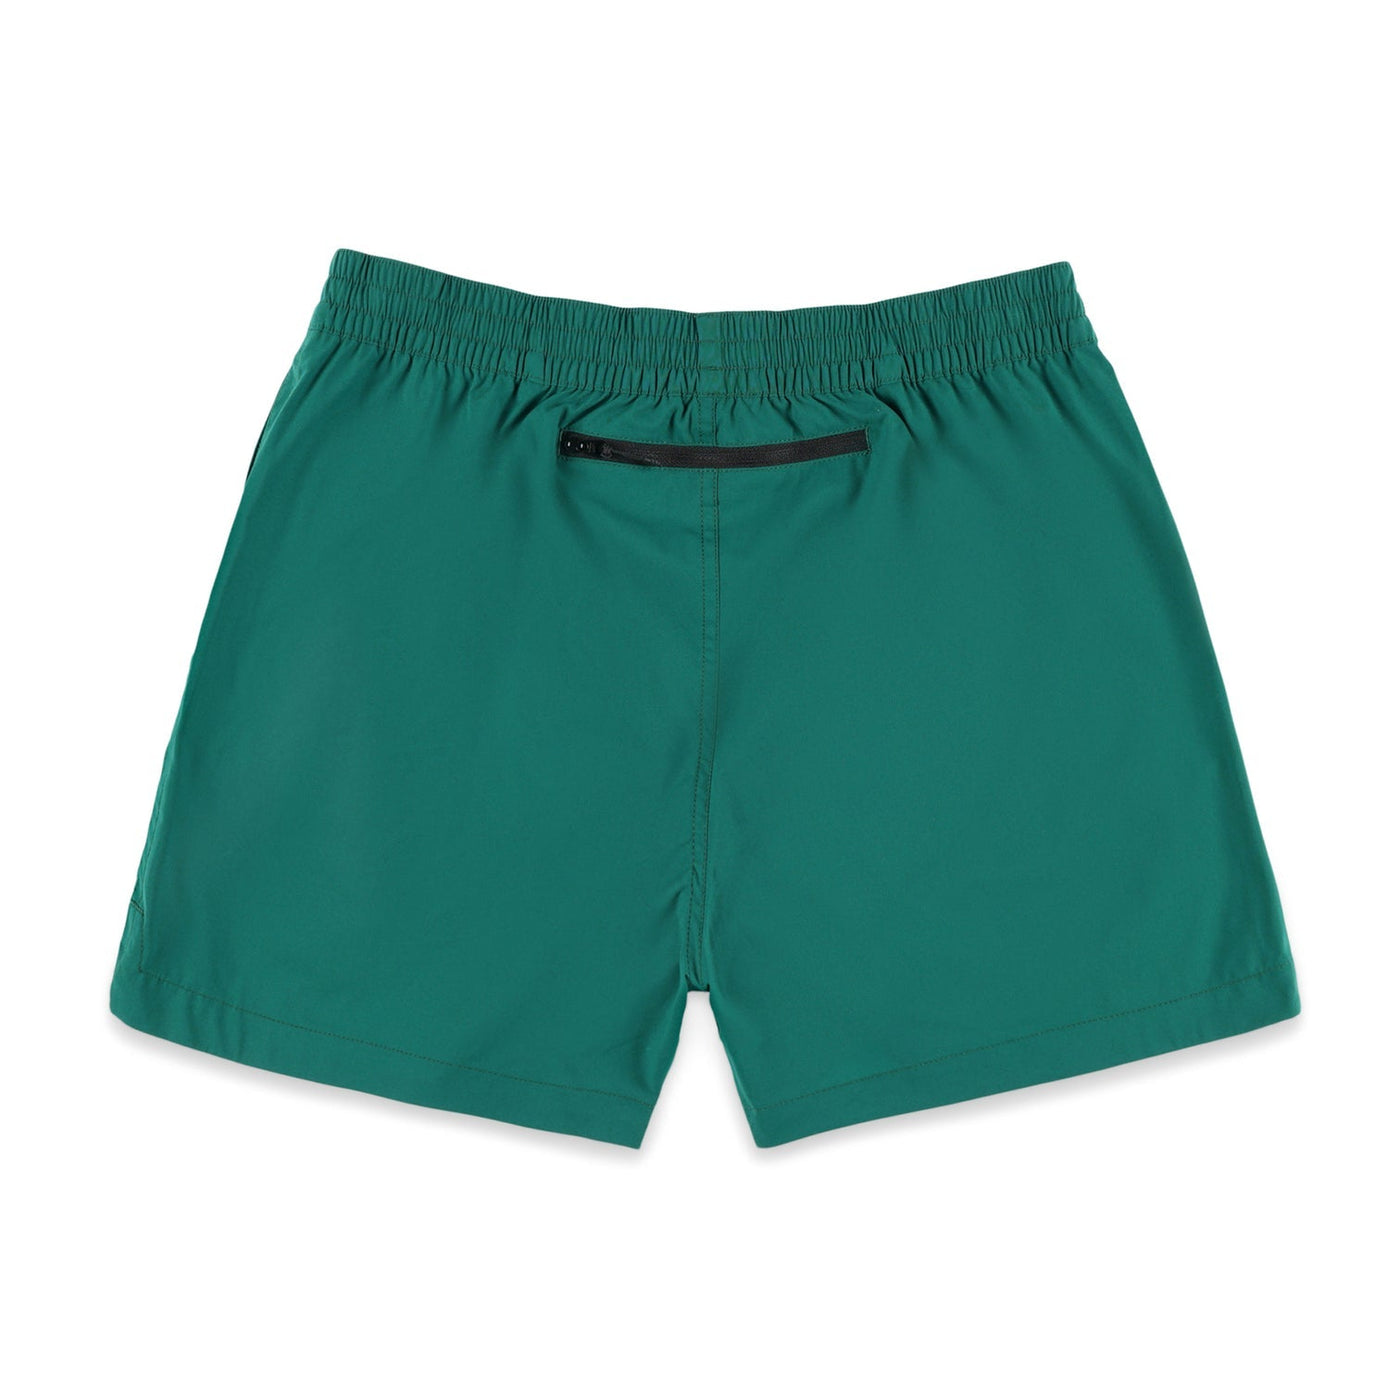 Women's Tech Shorts Lightweight - The Lake and Company